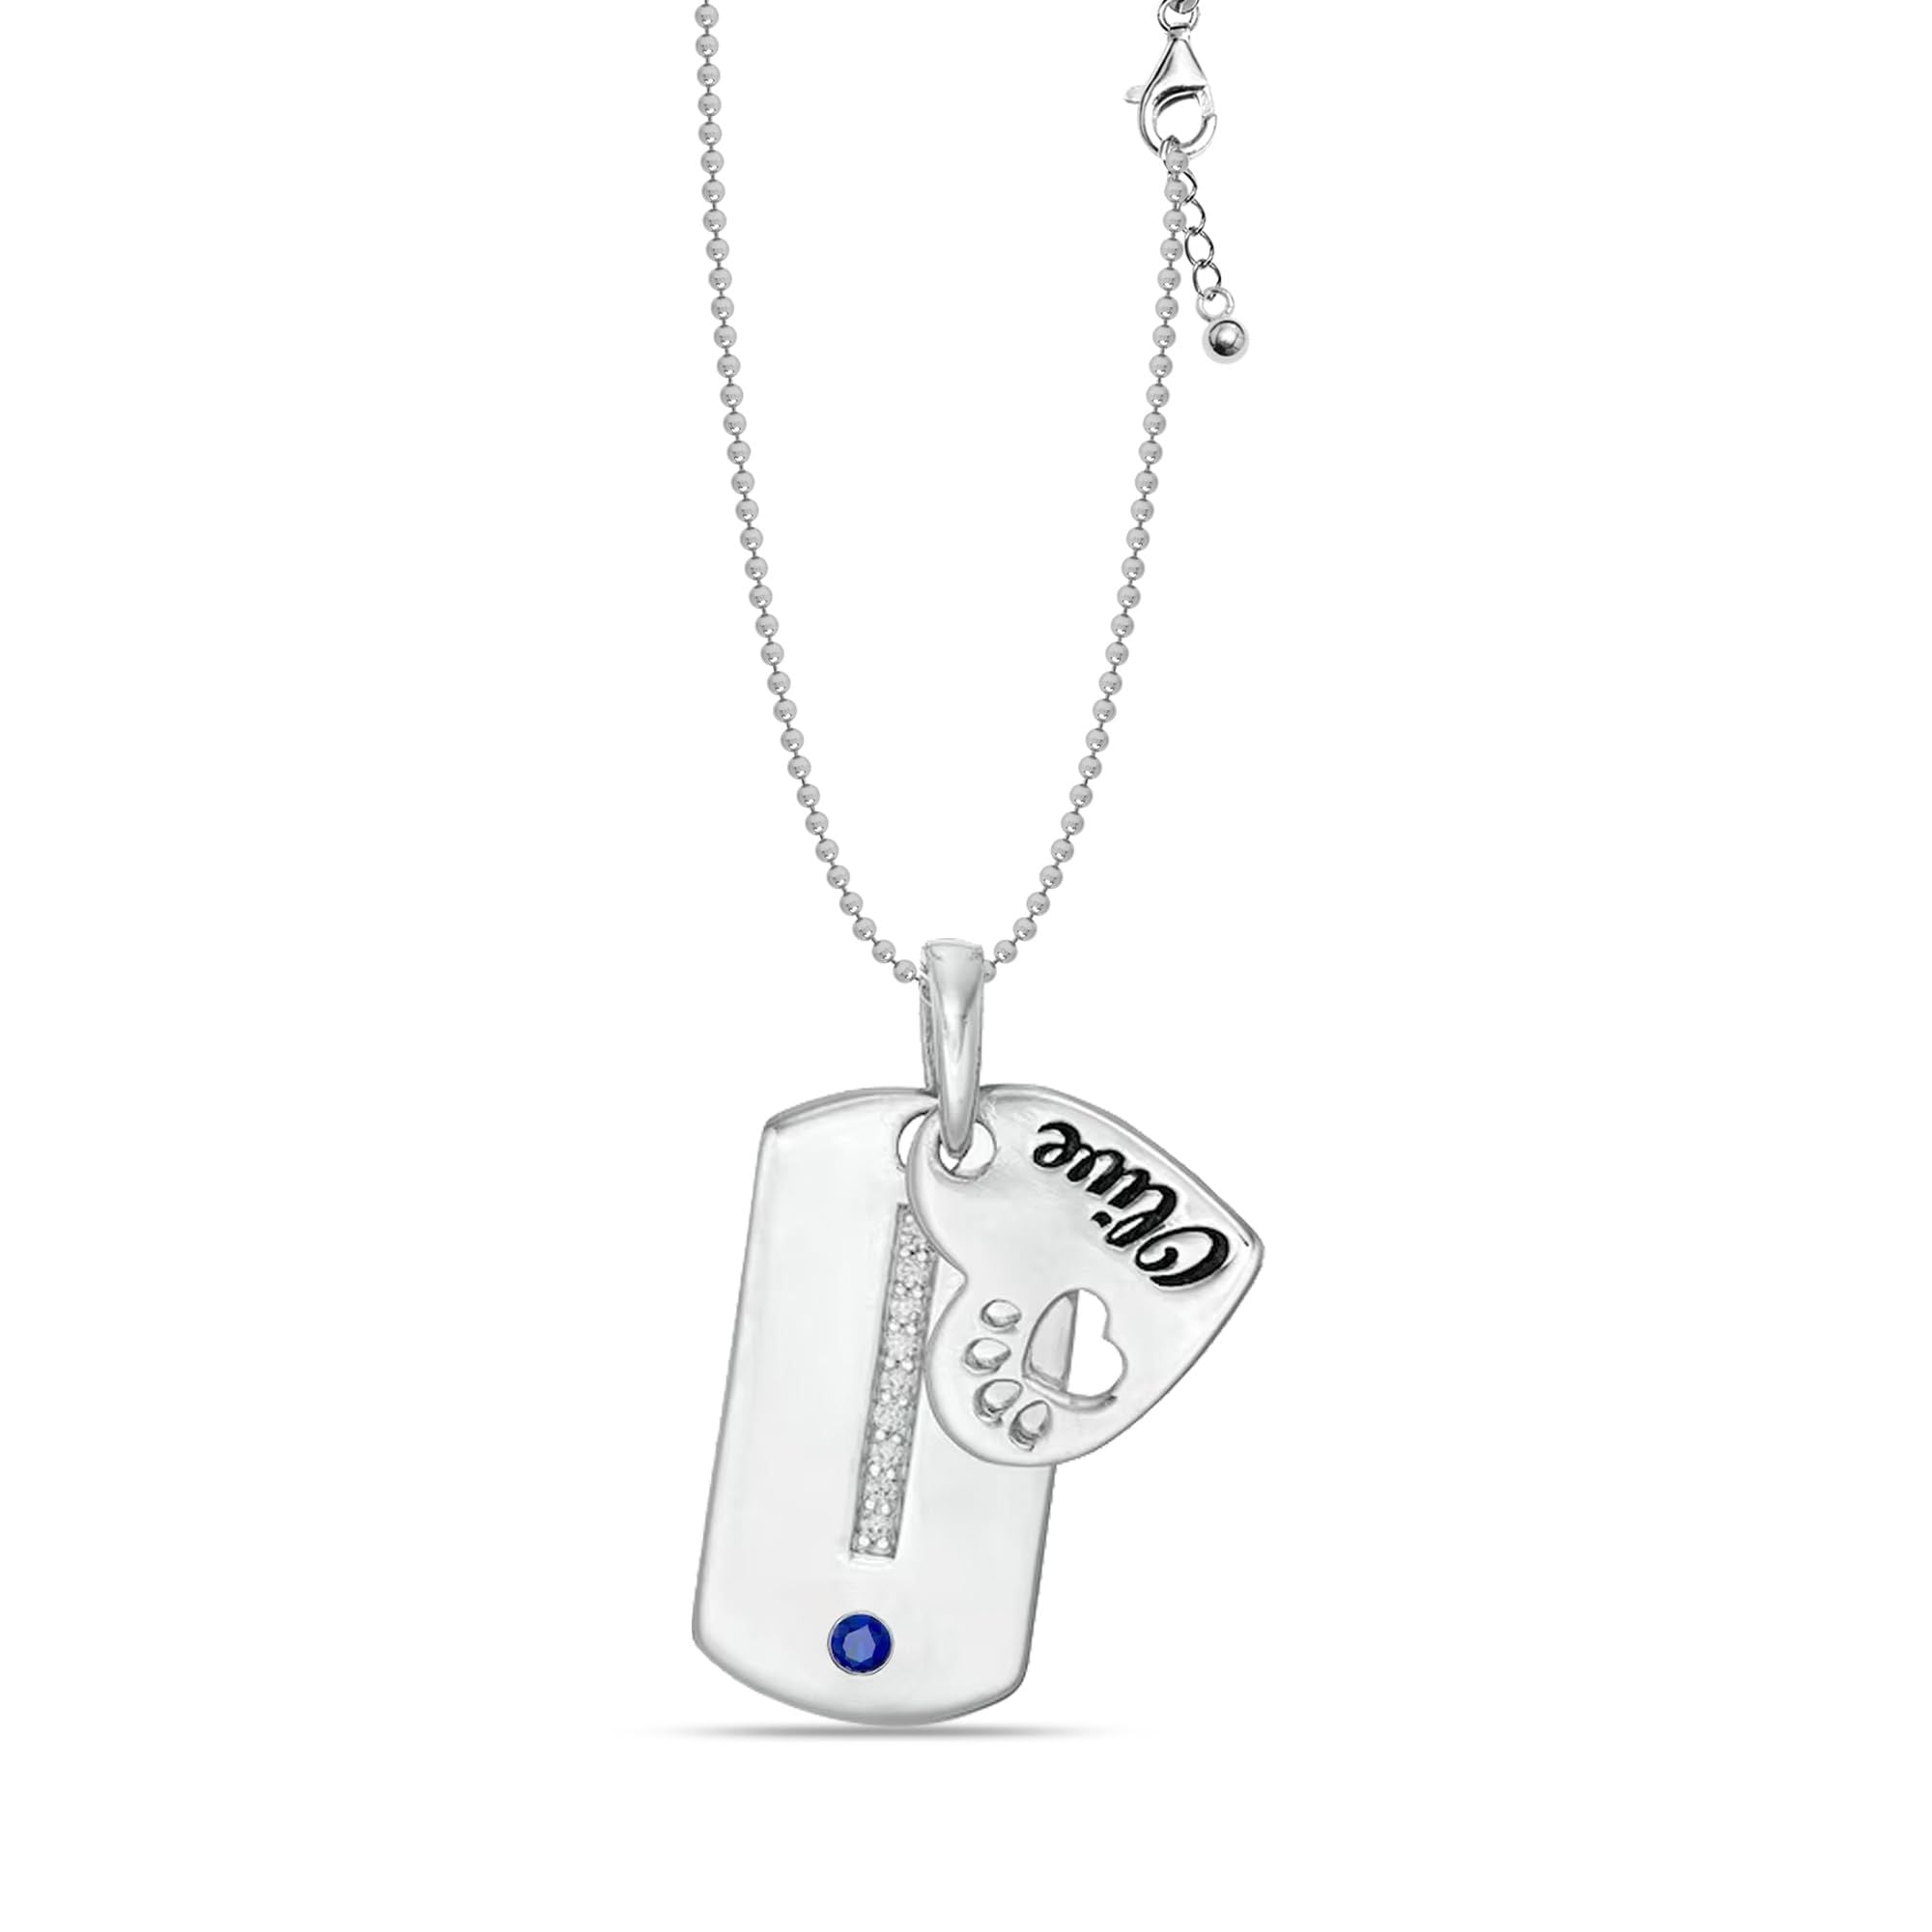 Personalised 925 Sterling Silver Heart Shaped Adorned With a Paw Cut-Out Custom Engraved Name Birthstone CZ Tiny Pendant Necklace for Men and Women